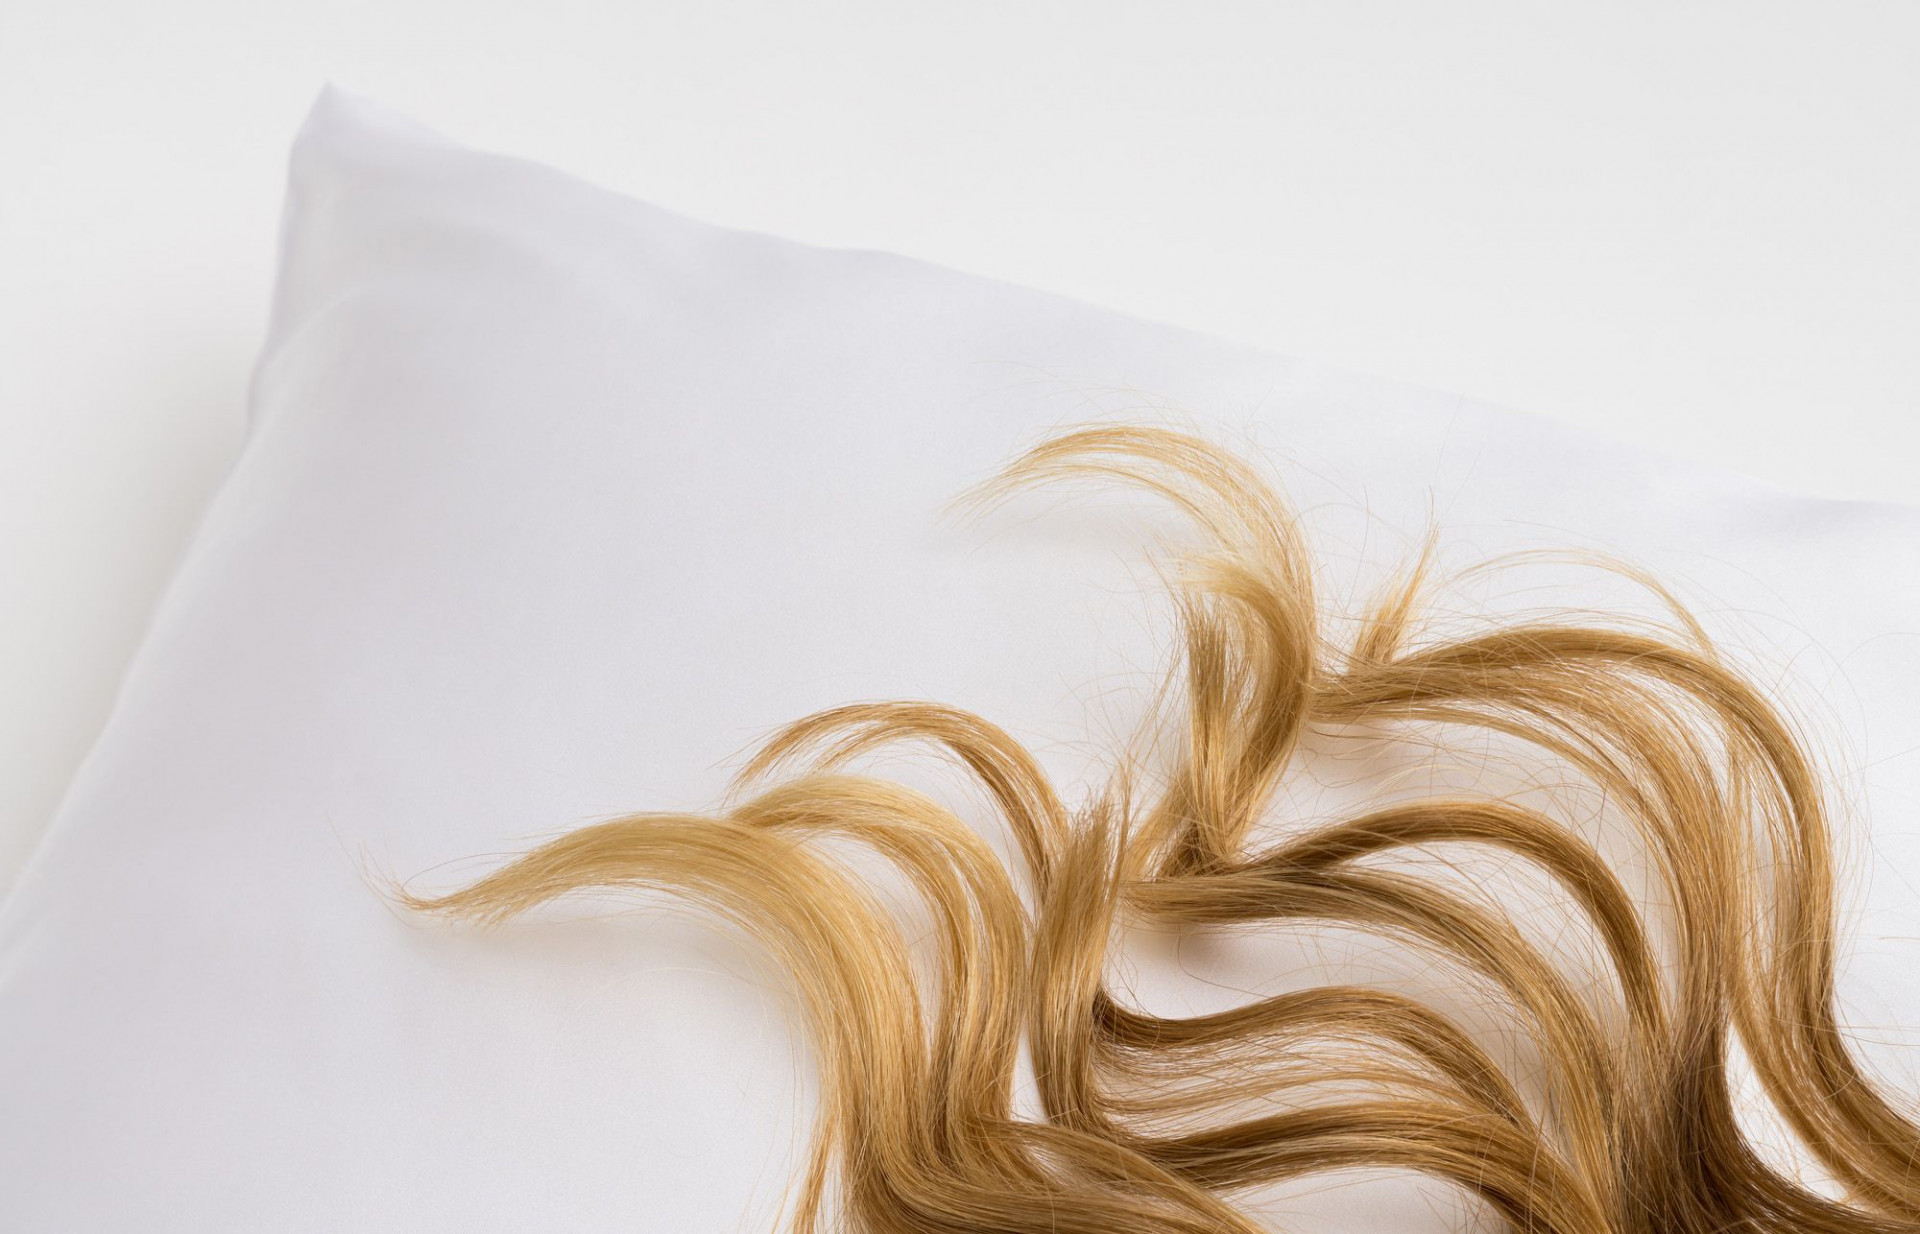 Smooth fabric adds lustre to your hair.